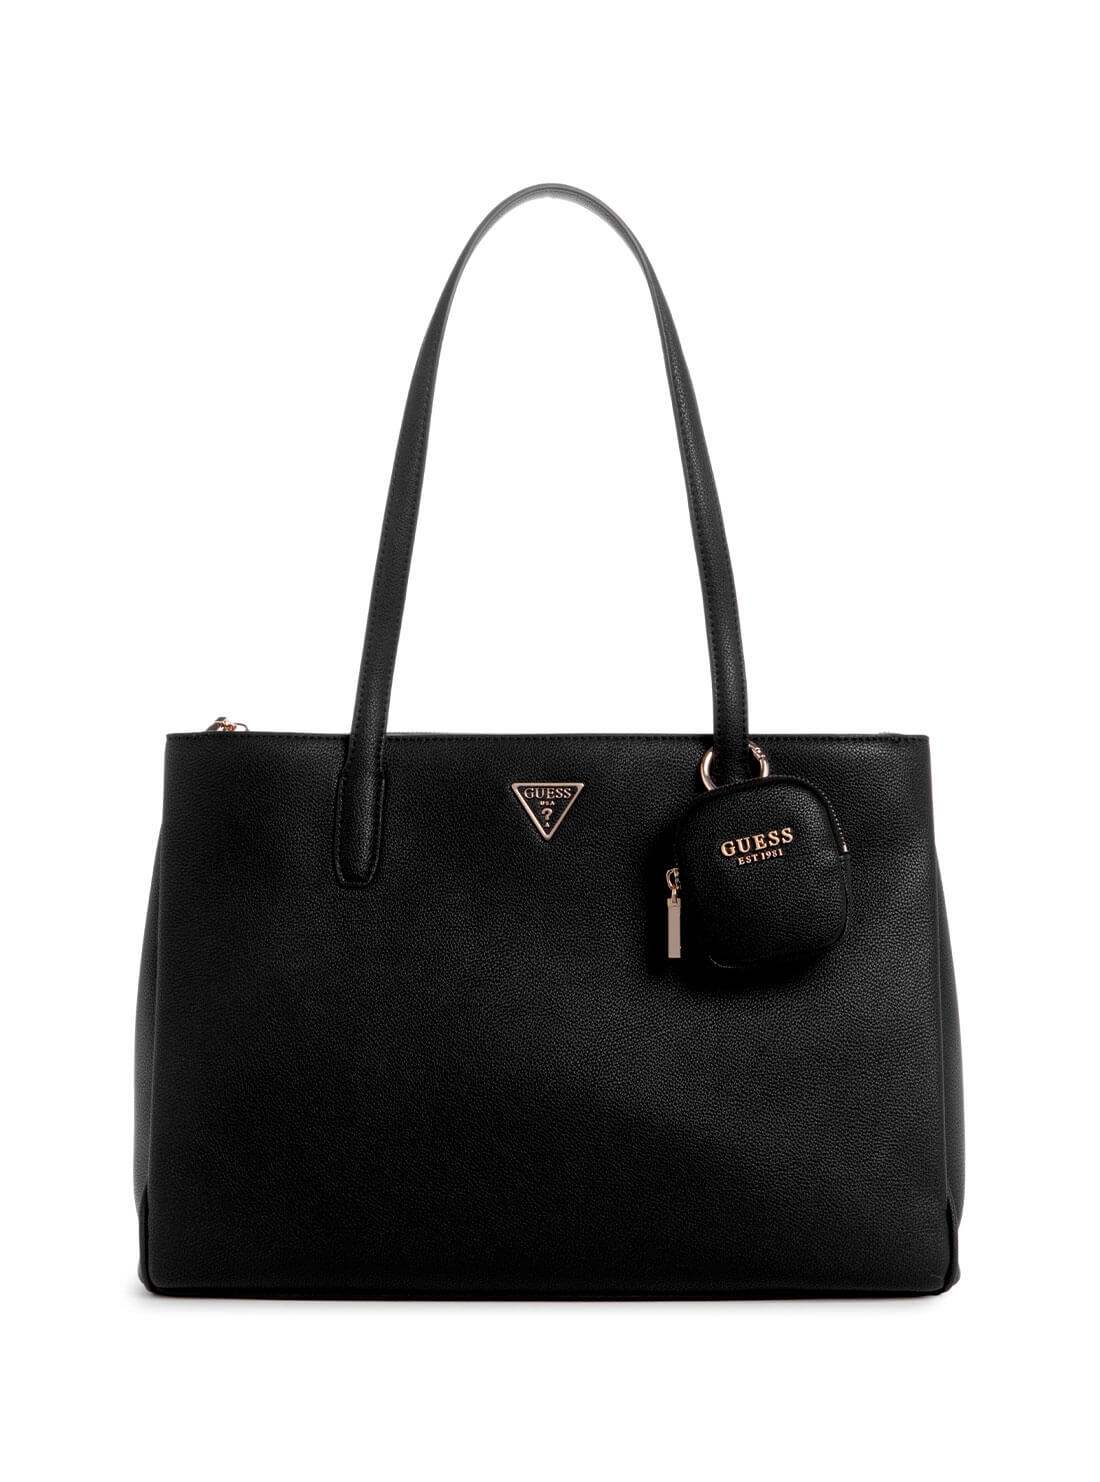 GUESS Black Power Play Tote Bag front view